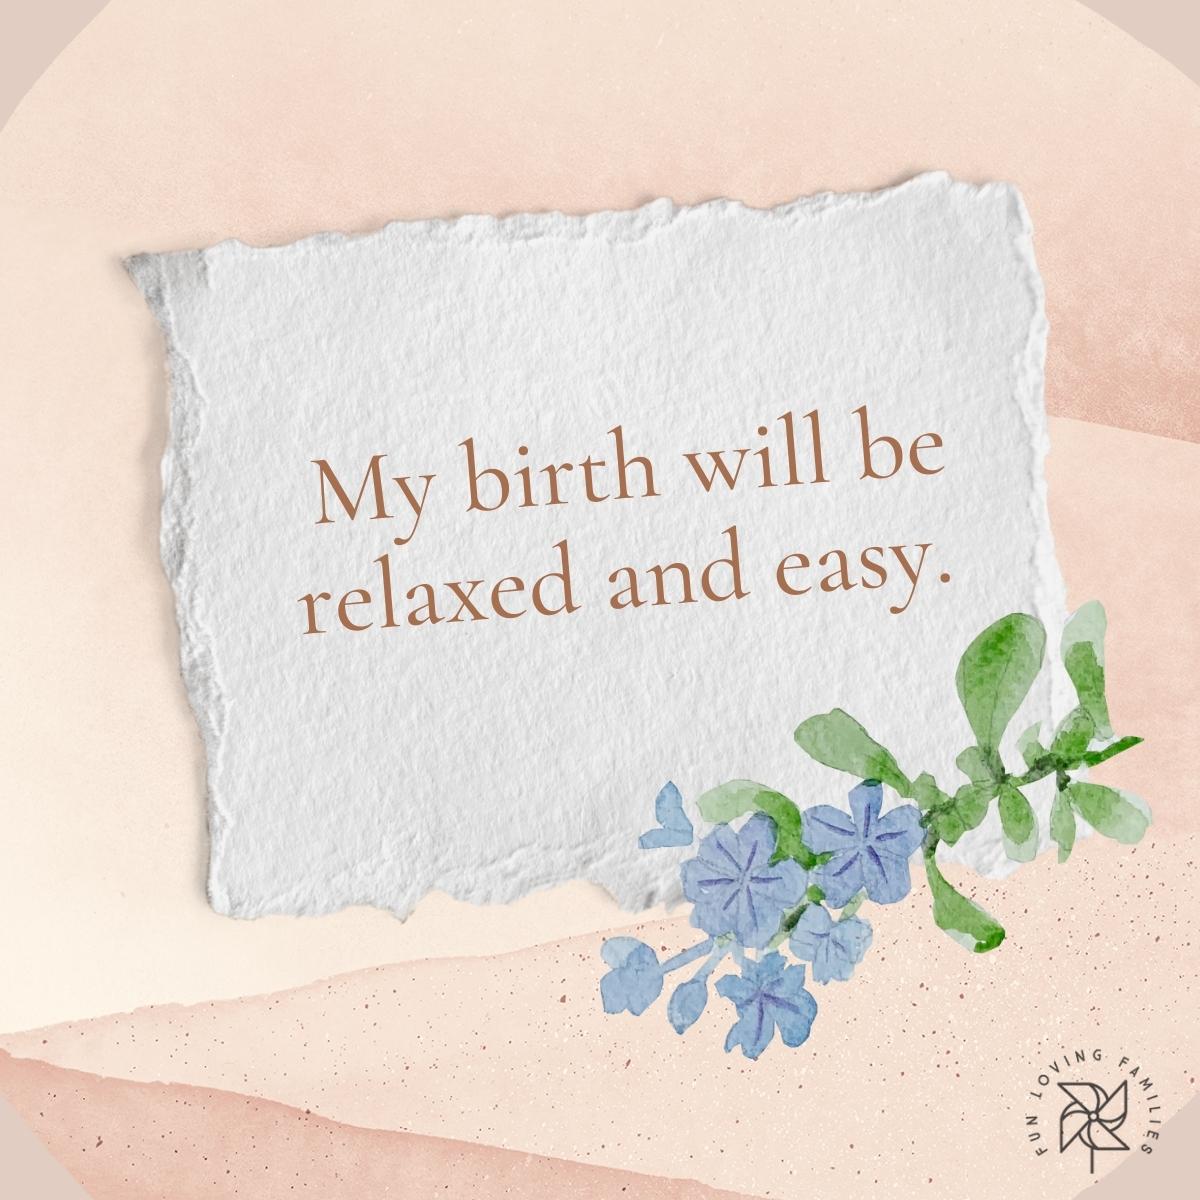 My birth will be relaxed and easy affirmation